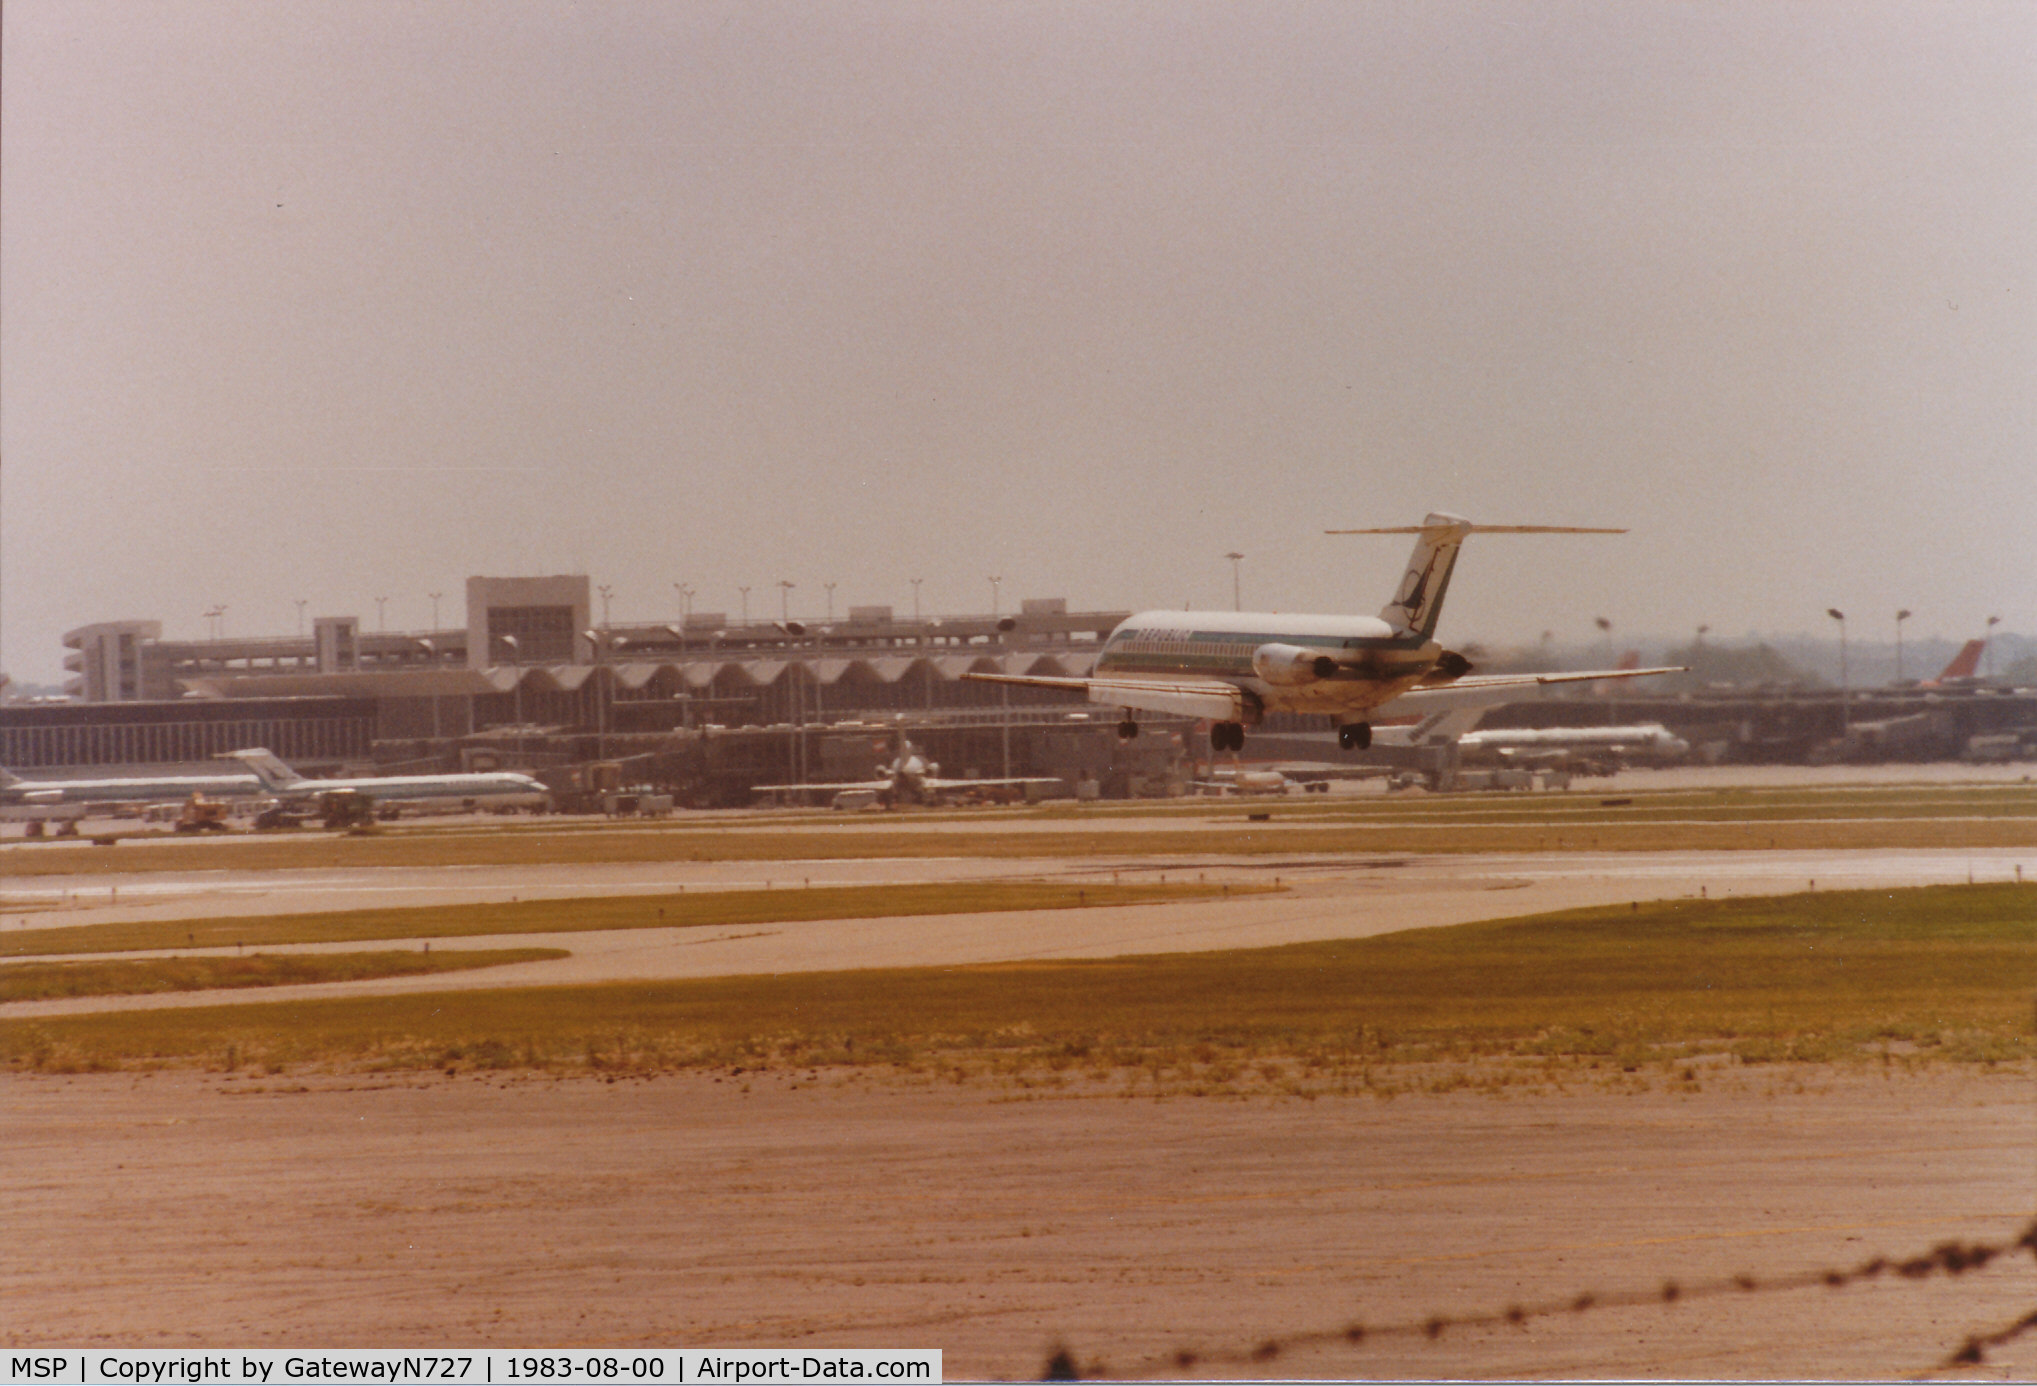 Minneapolis-st Paul Intl/wold-chamberlain Airport (MSP) - Republic DC-9 over the numbers rwy 11L.